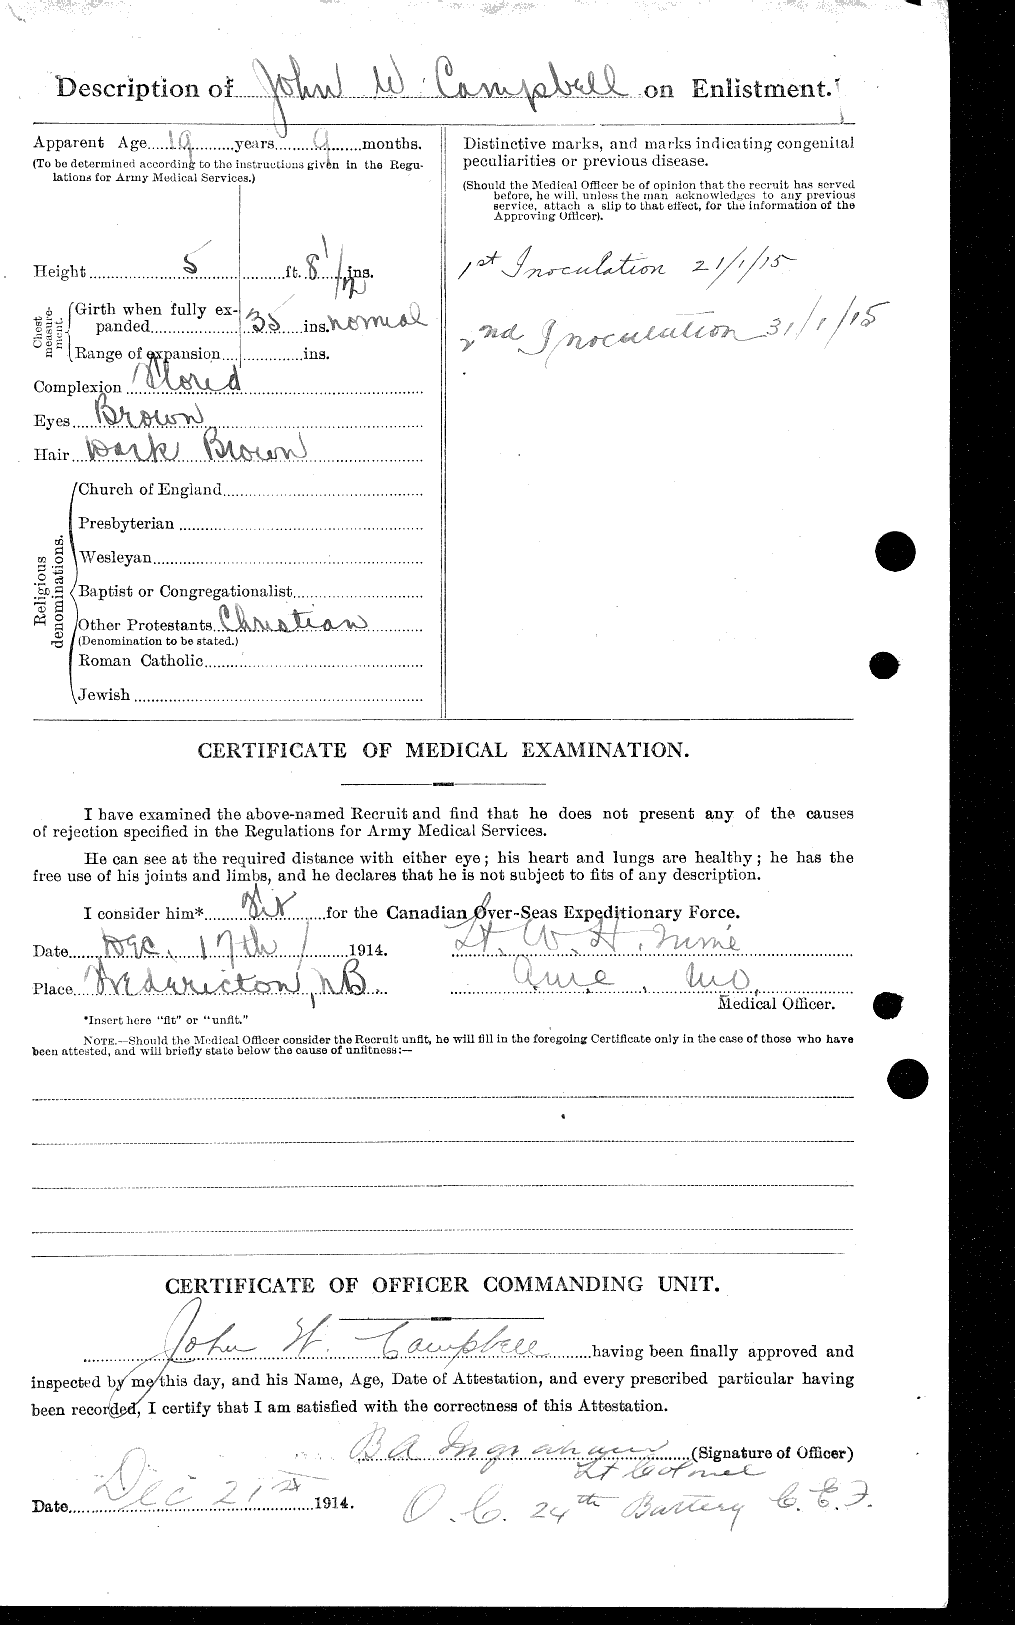 Personnel Records of the First World War - CEF 003803b